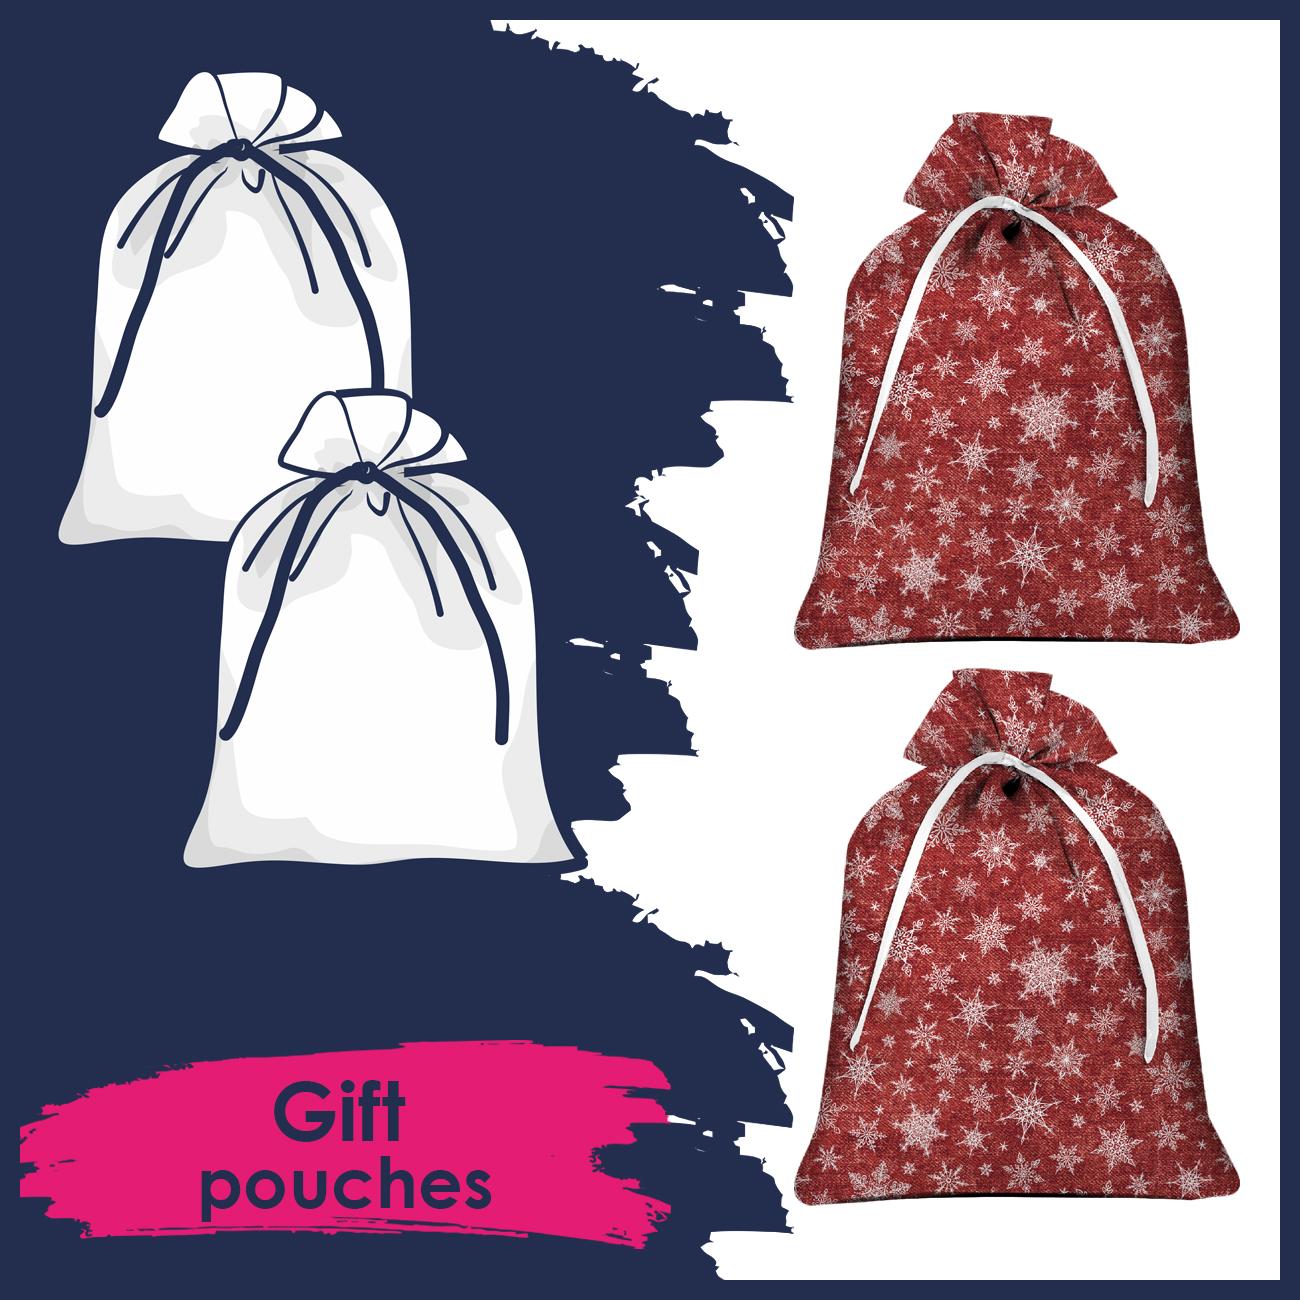 Gift pouches